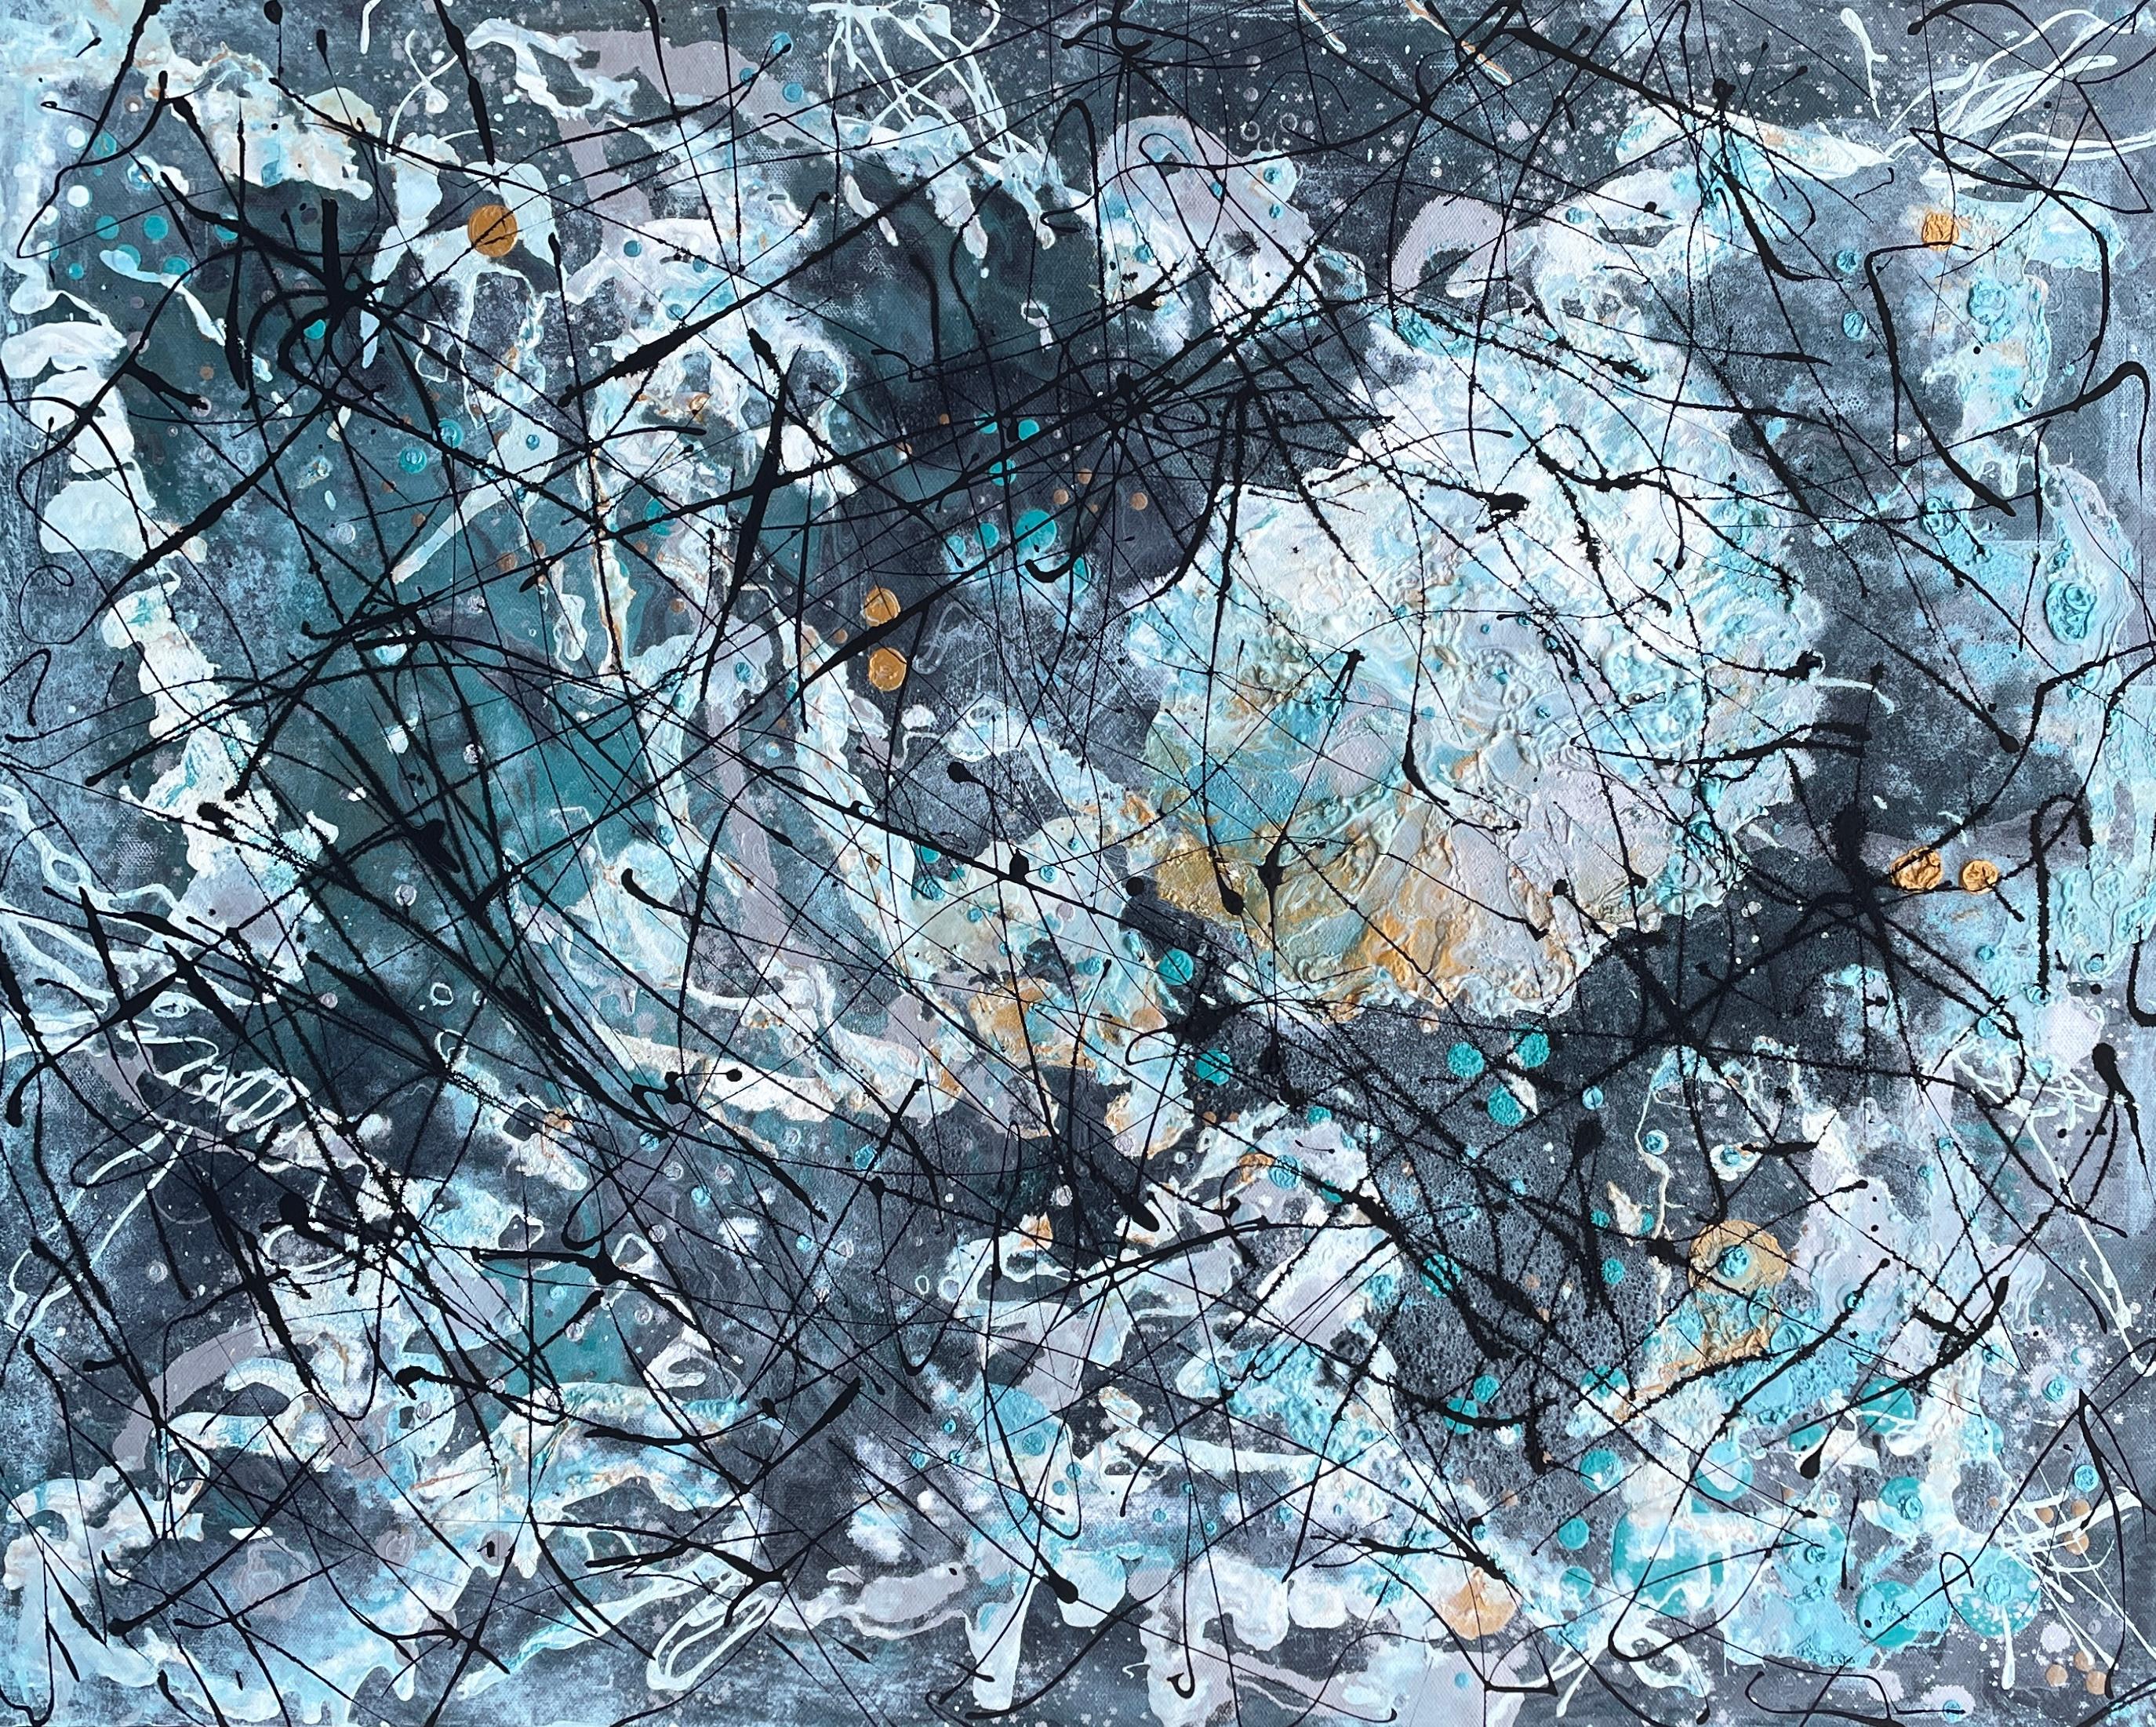 'Praying Boy' by Lori Poncsak is a compelling 24" x 30" acrylic on canvas that delves into the raw essence of abstract expressionism. The piece is dominated by a cool palette of deep blues and aquamarines, contrasted with chaotic sweeps of black and